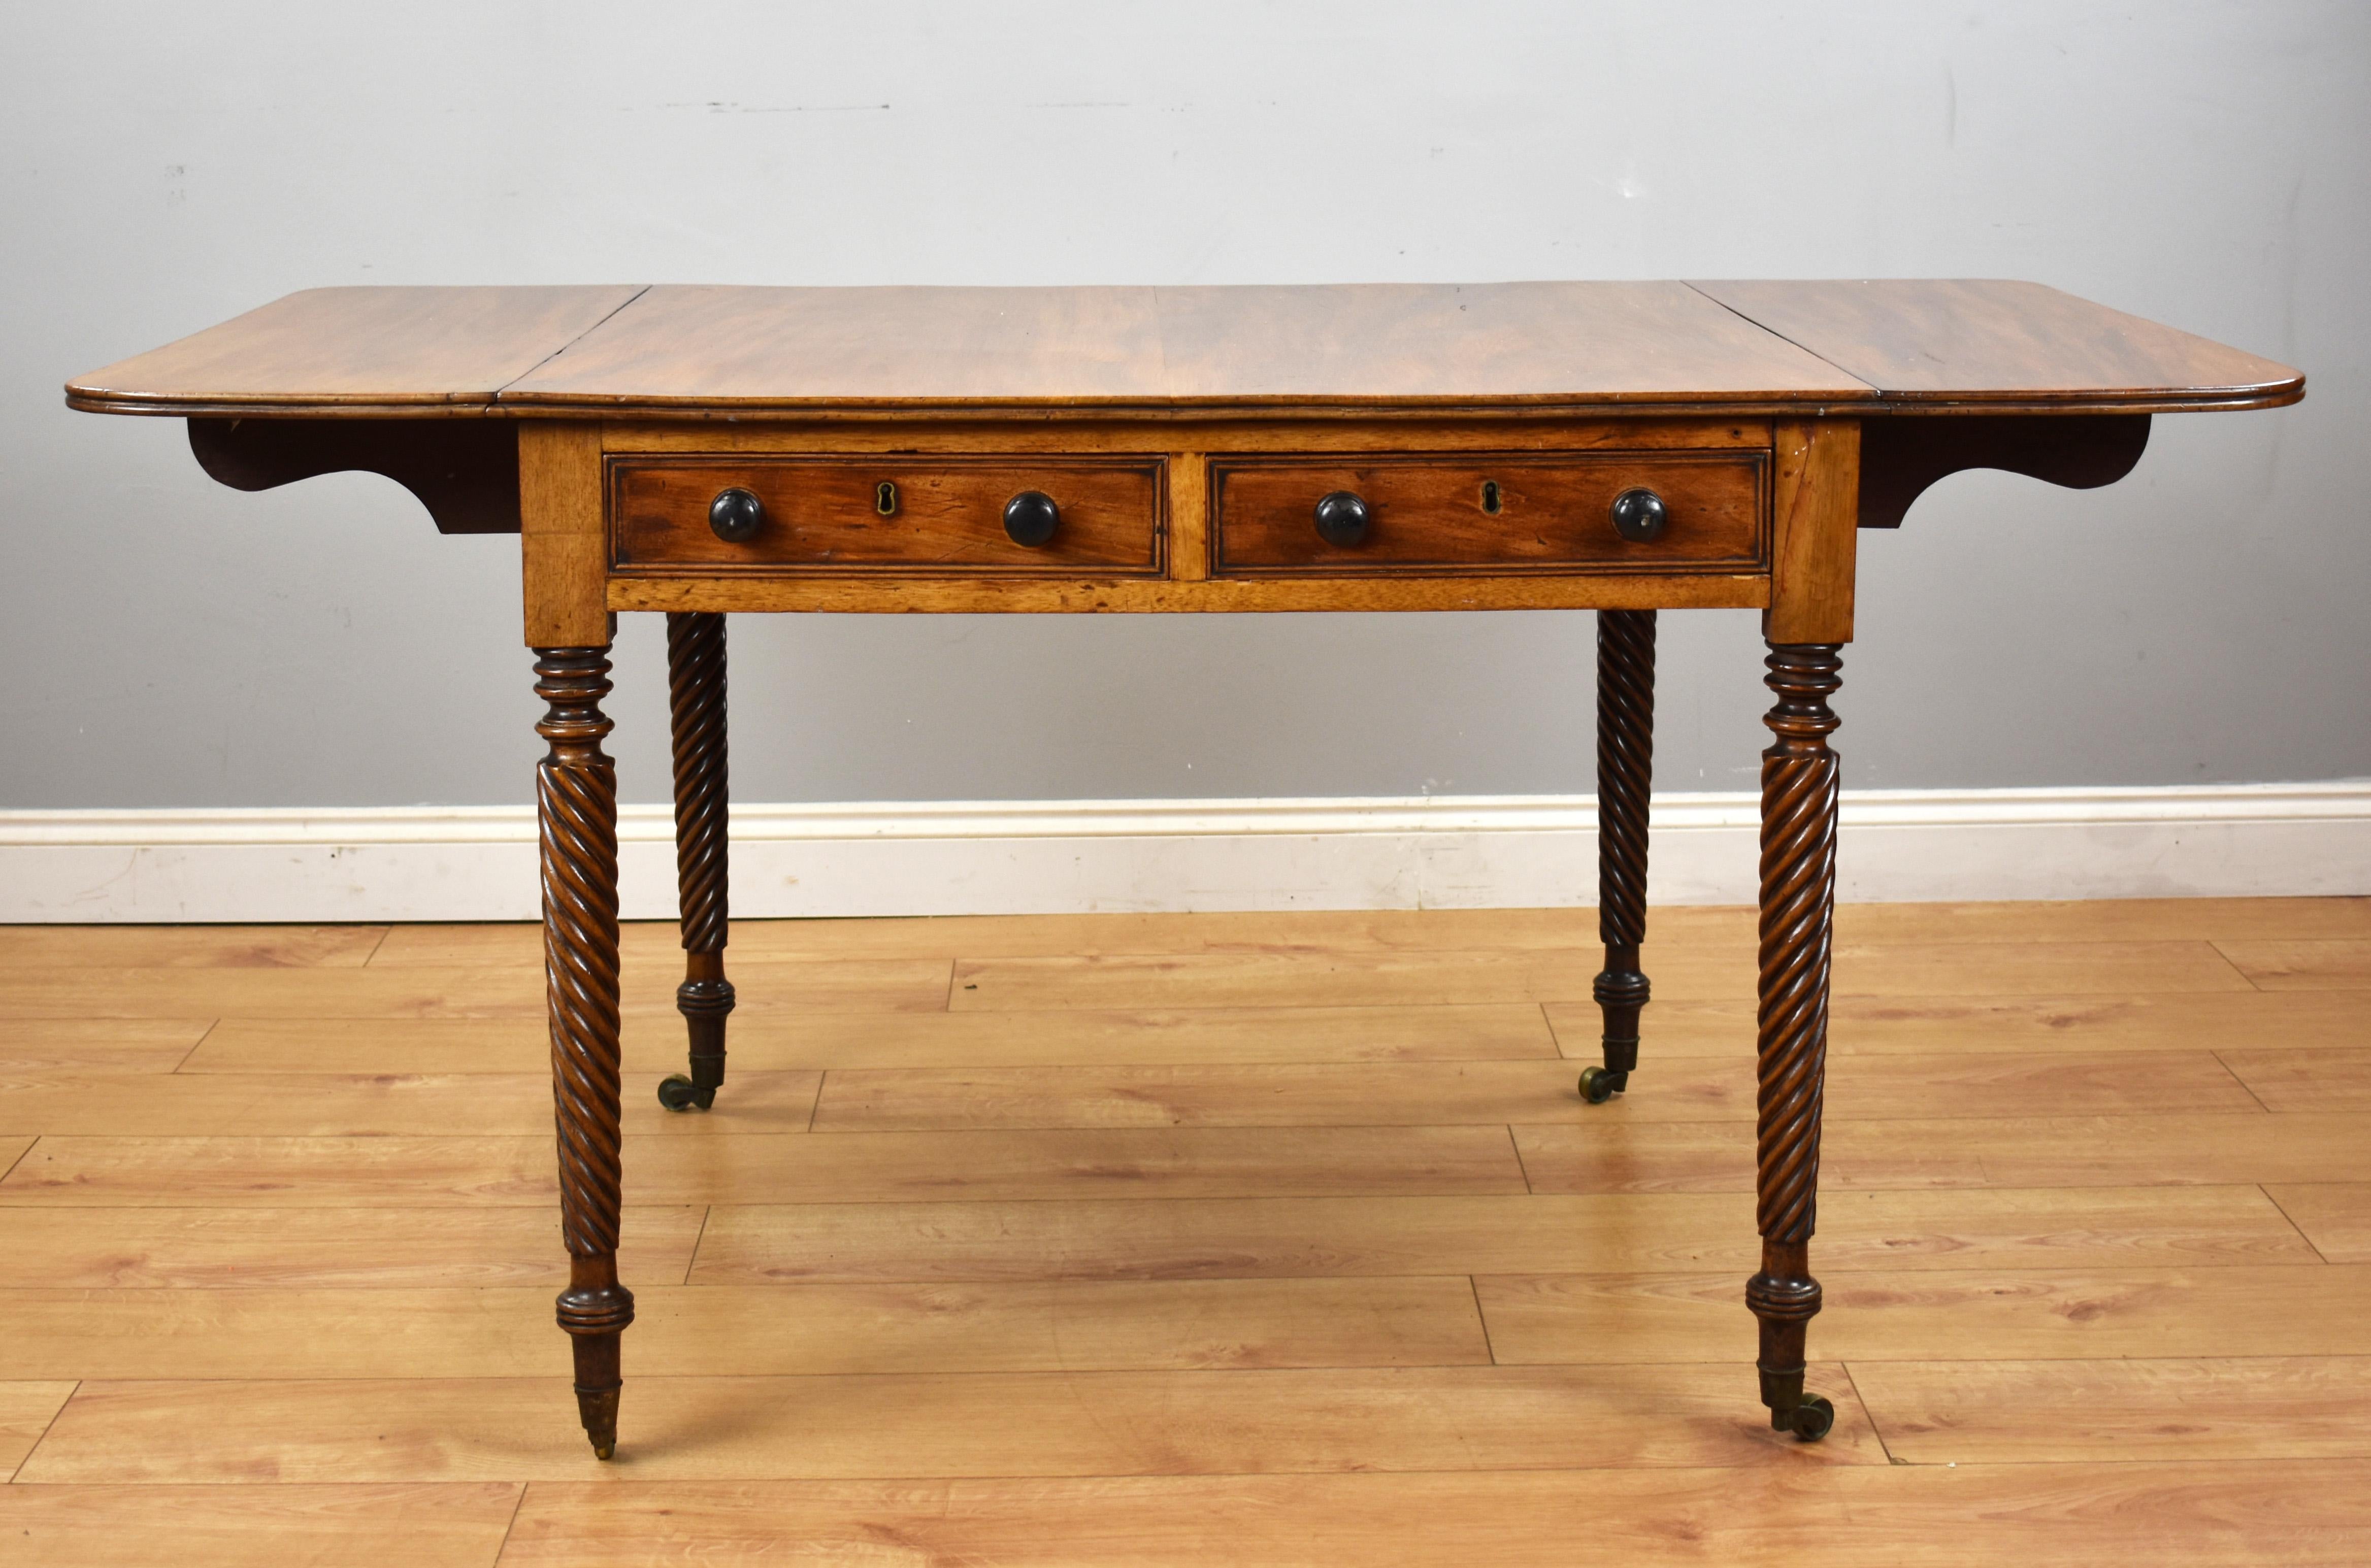 19th Century English Regency Mahogany Drop-Leaf Table In Good Condition For Sale In Chelmsford, Essex